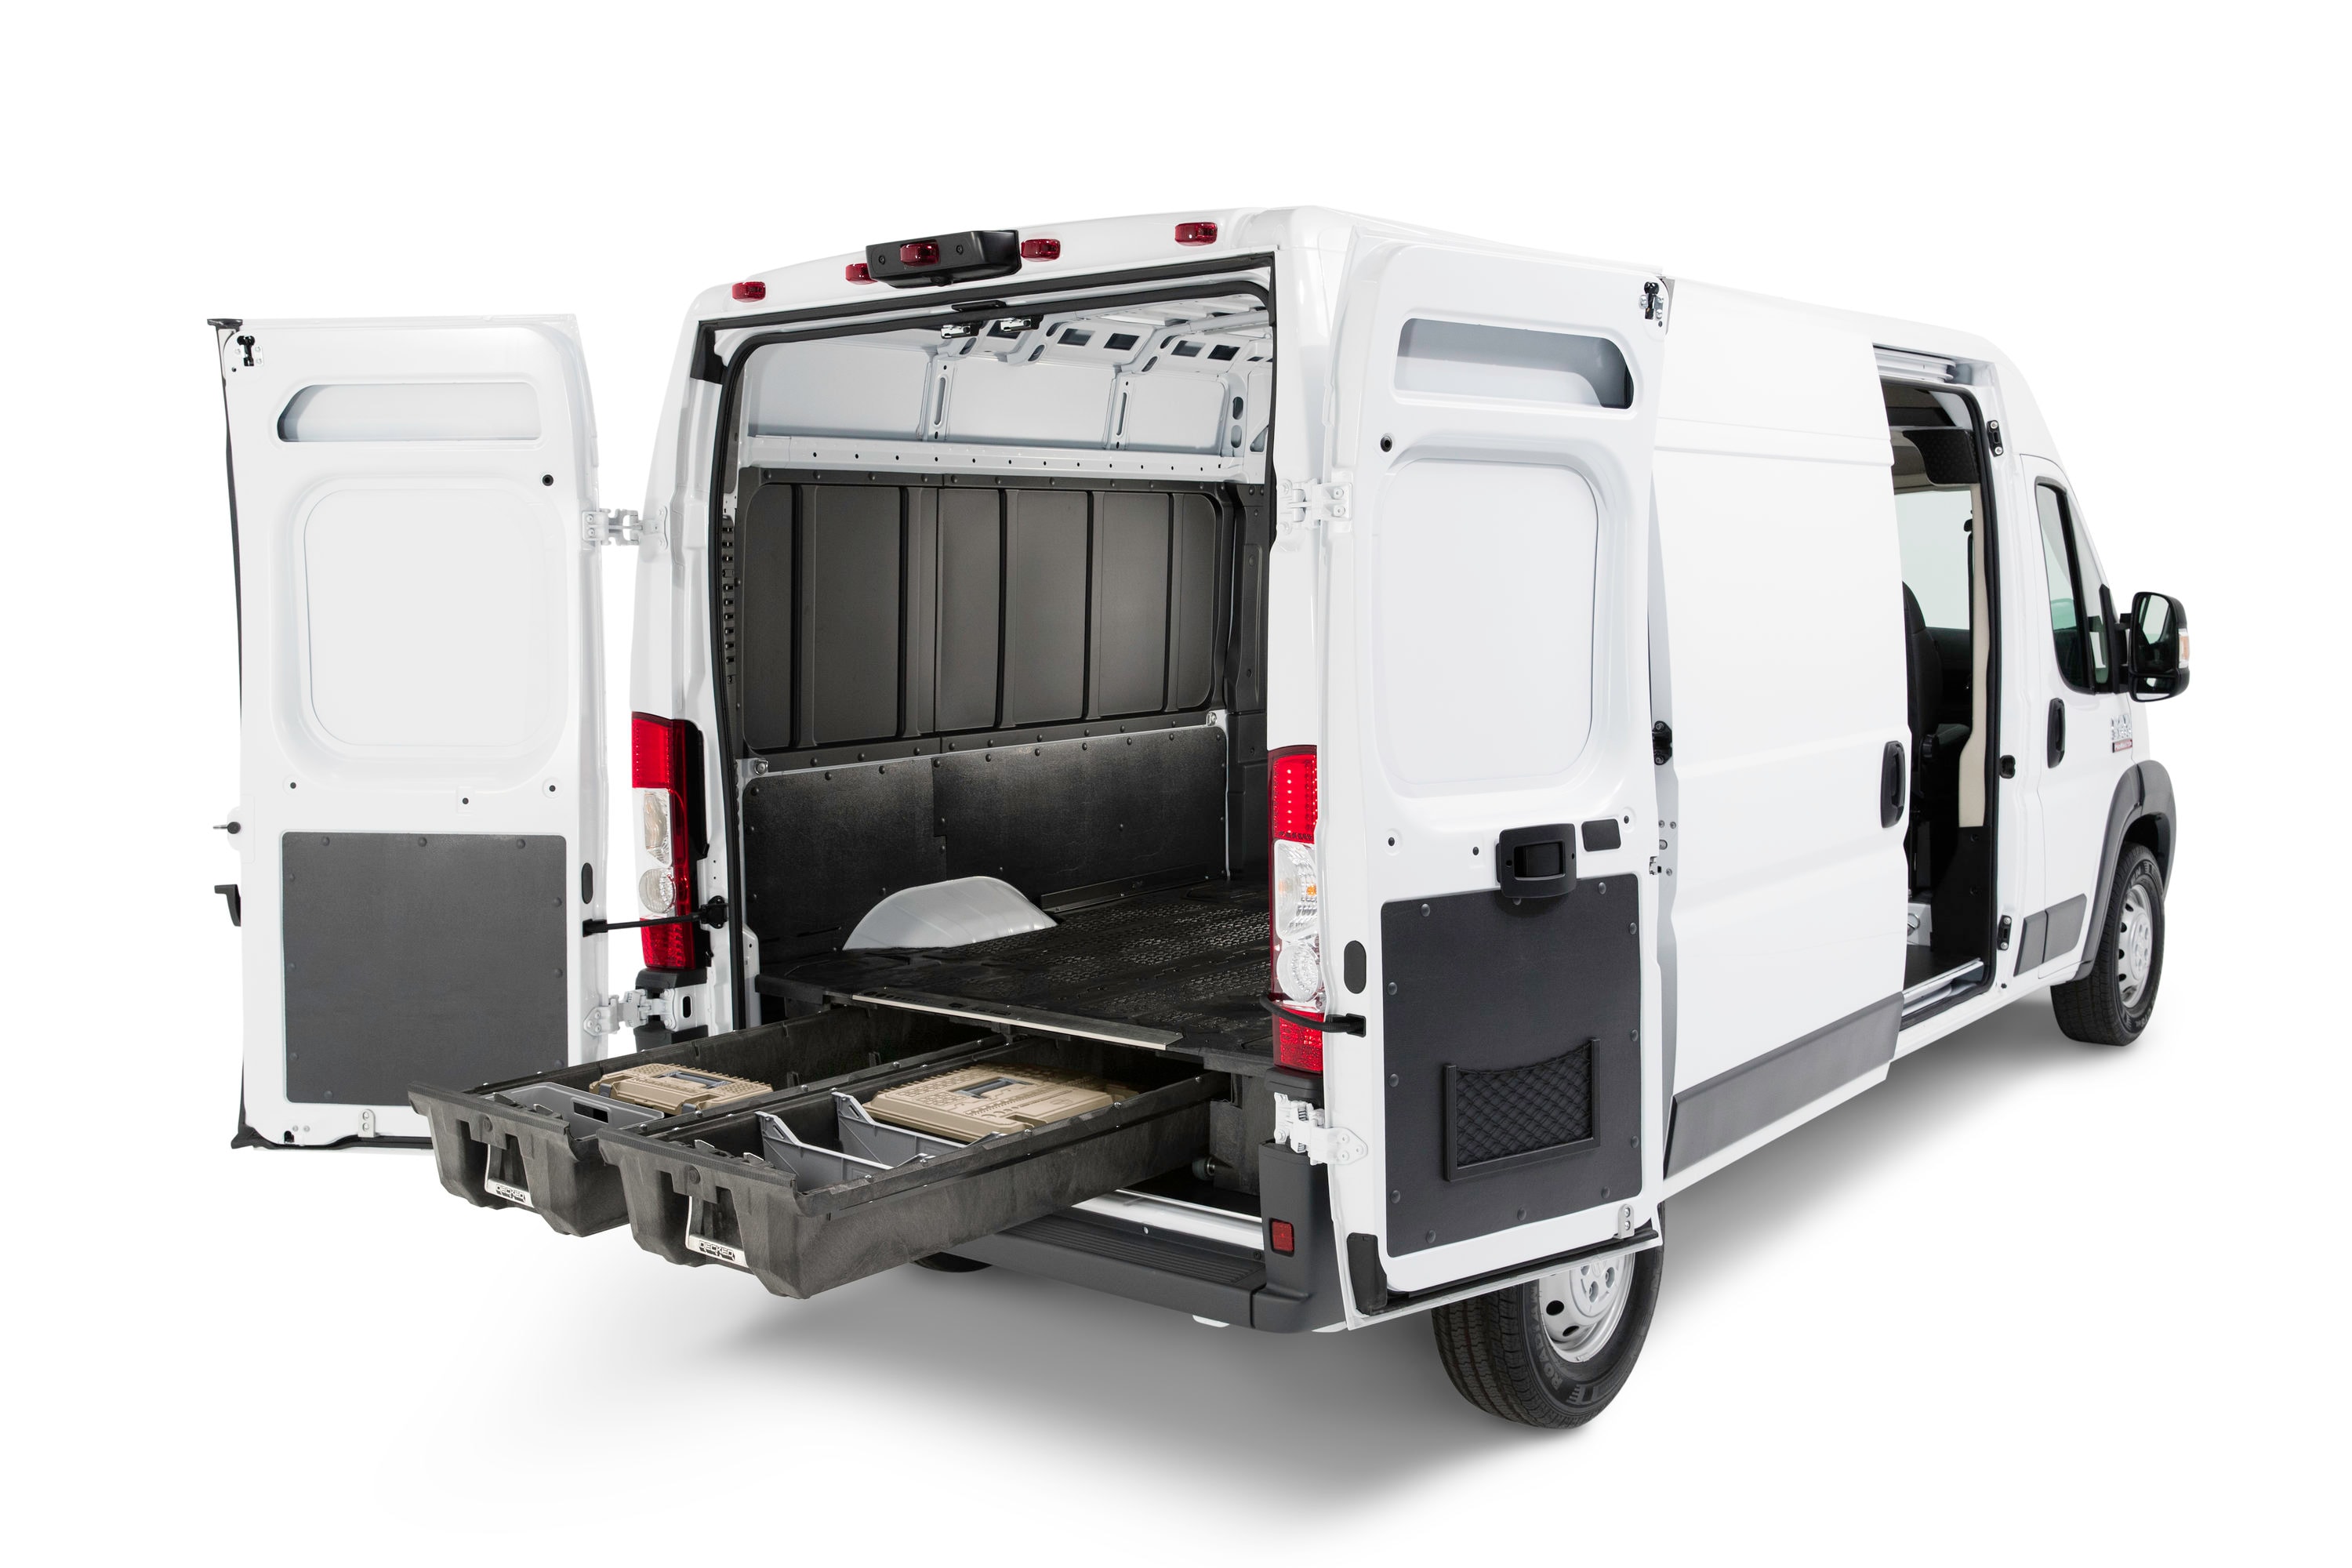 DECKED DECKED Storage System for RAM Promaster Cargo Van (2014-current)- 136-in Wheel Base in Black | VNRA13PROM55